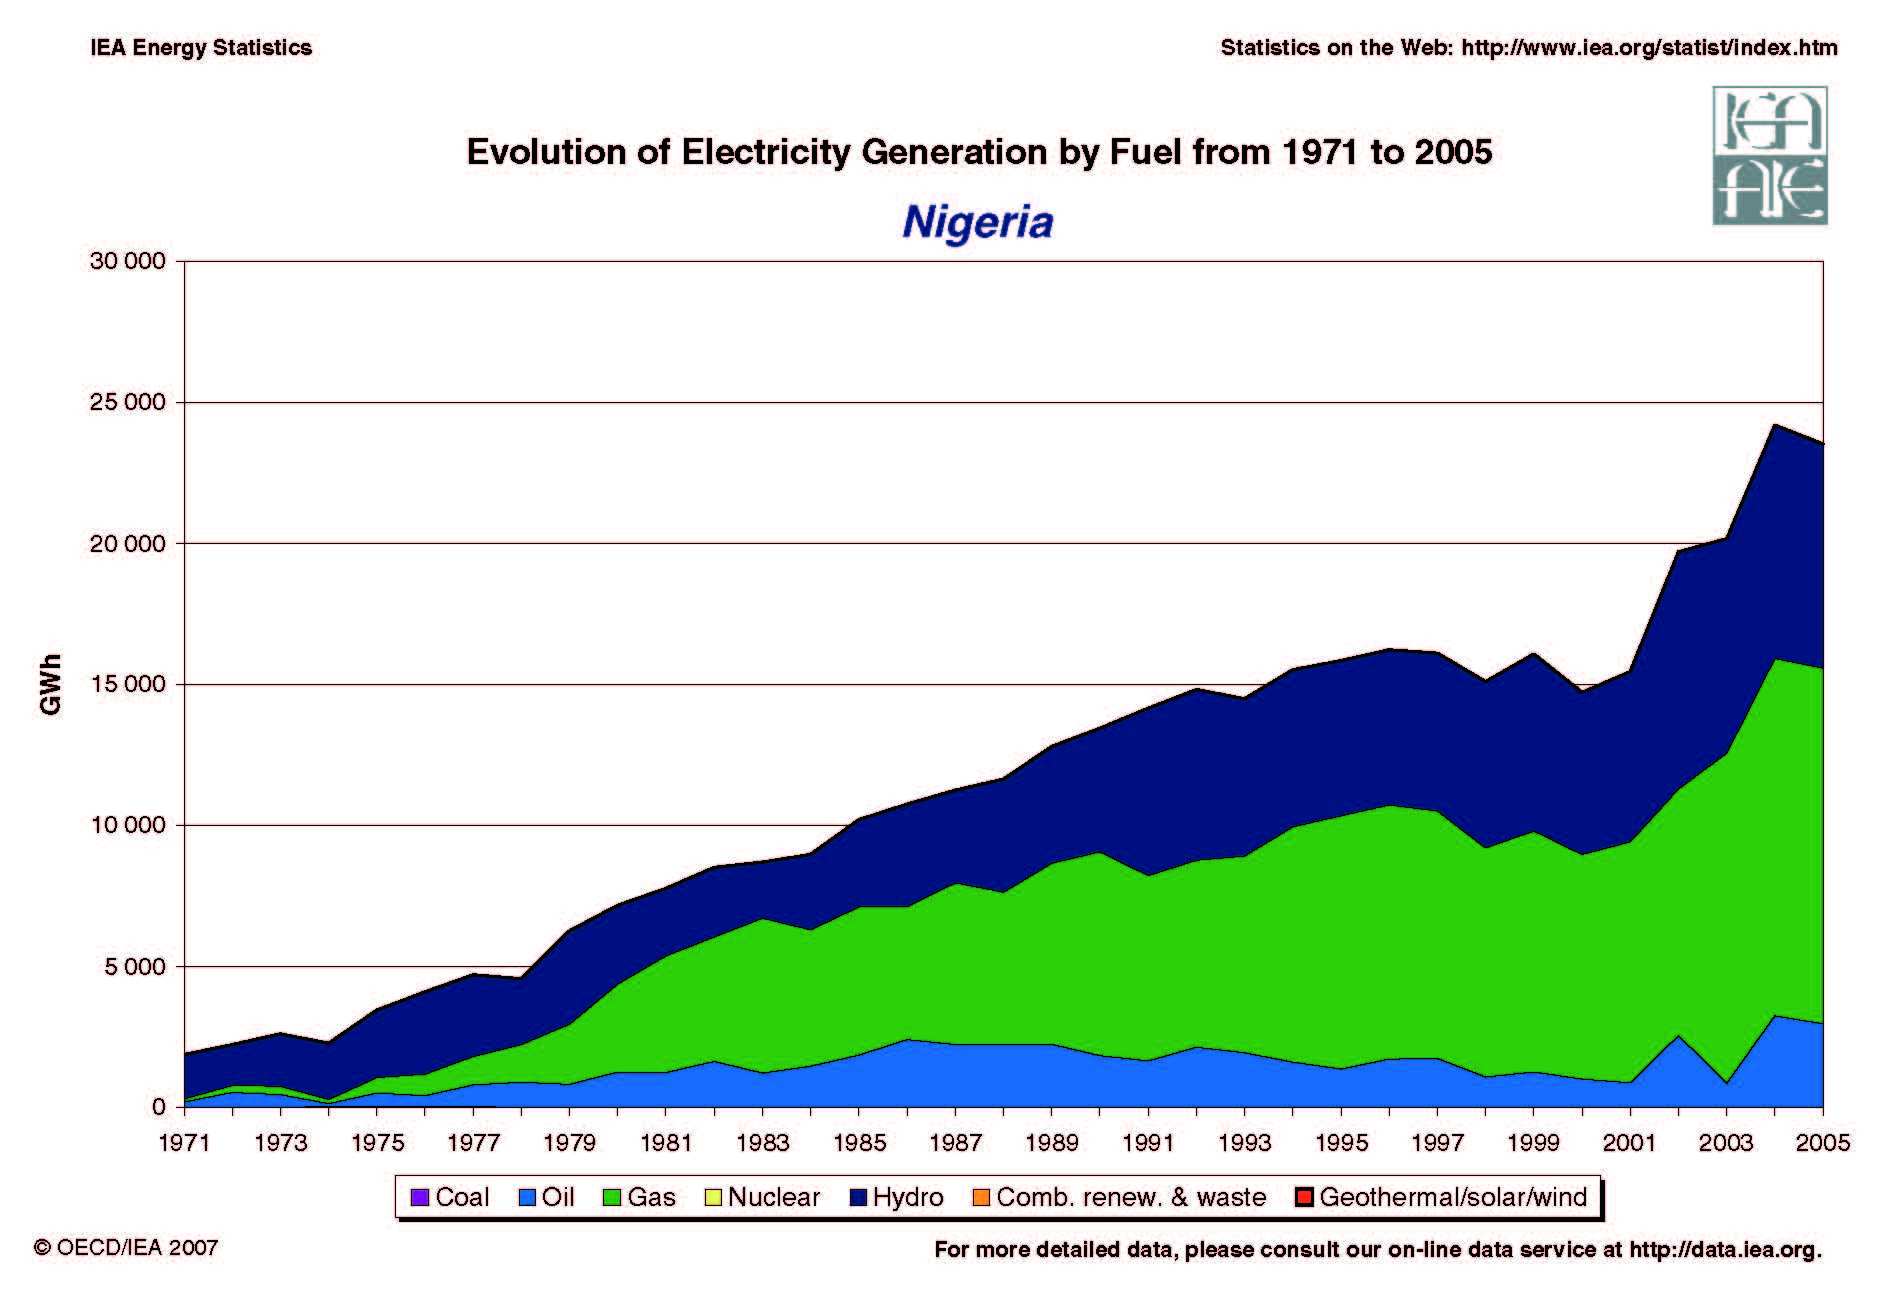 Nigeria Evolution of Electricity Generation by Fuel 1971 - 2005